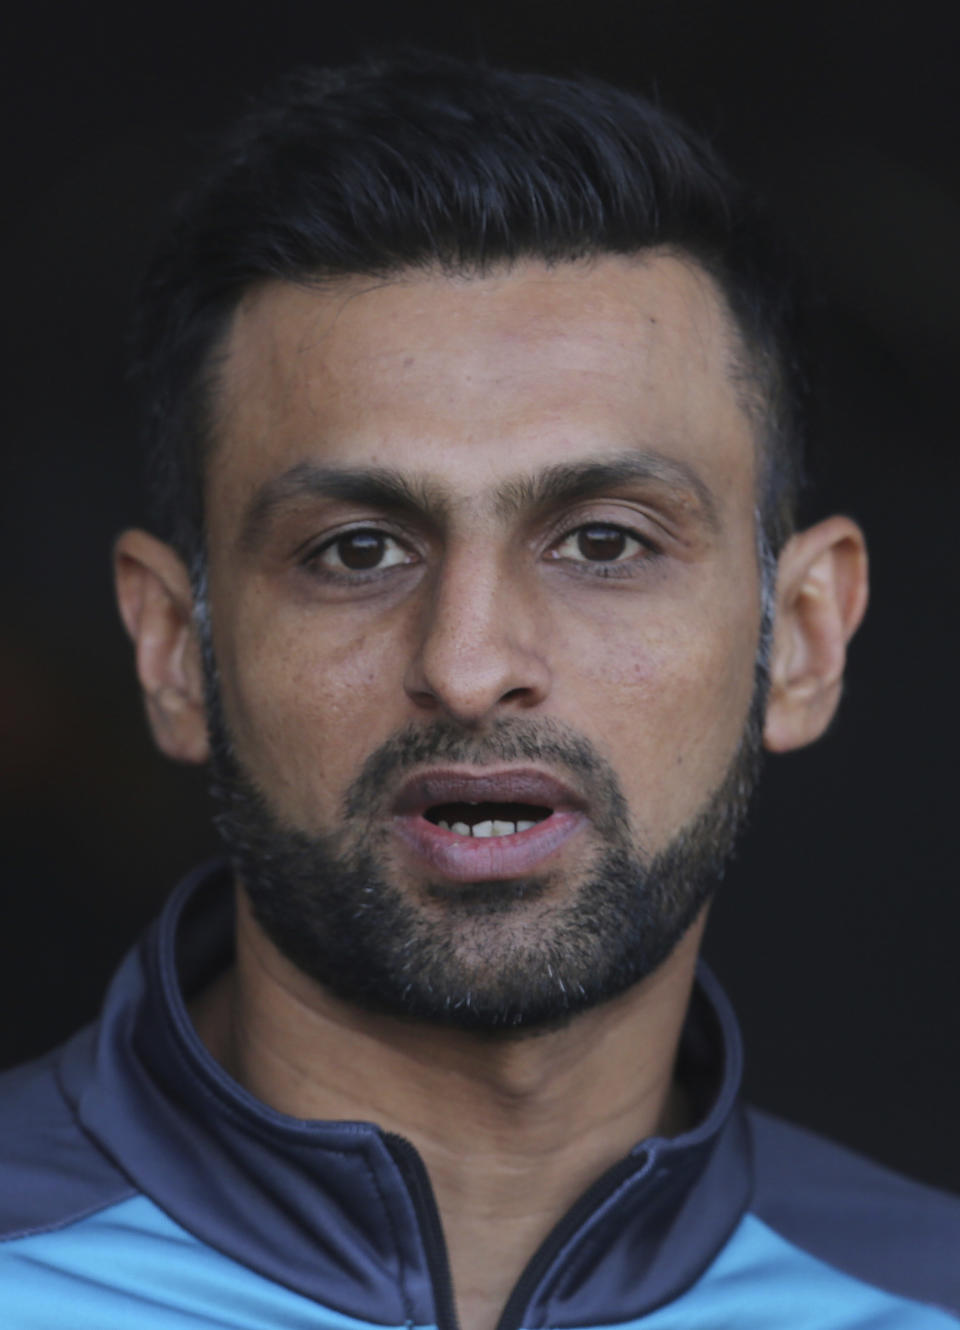 Pakistan allrounder Shoaib Malik gestures addresses a press conference in Lahore, Pakistan, Wednesday Jan. 22, 2020. Malik said he wants to focus on the home Twenty20 series against Bangladesh, starting from Friday instead of focussing on T20 World Cup later this year. (AP Photo/K.M. Chaudary)